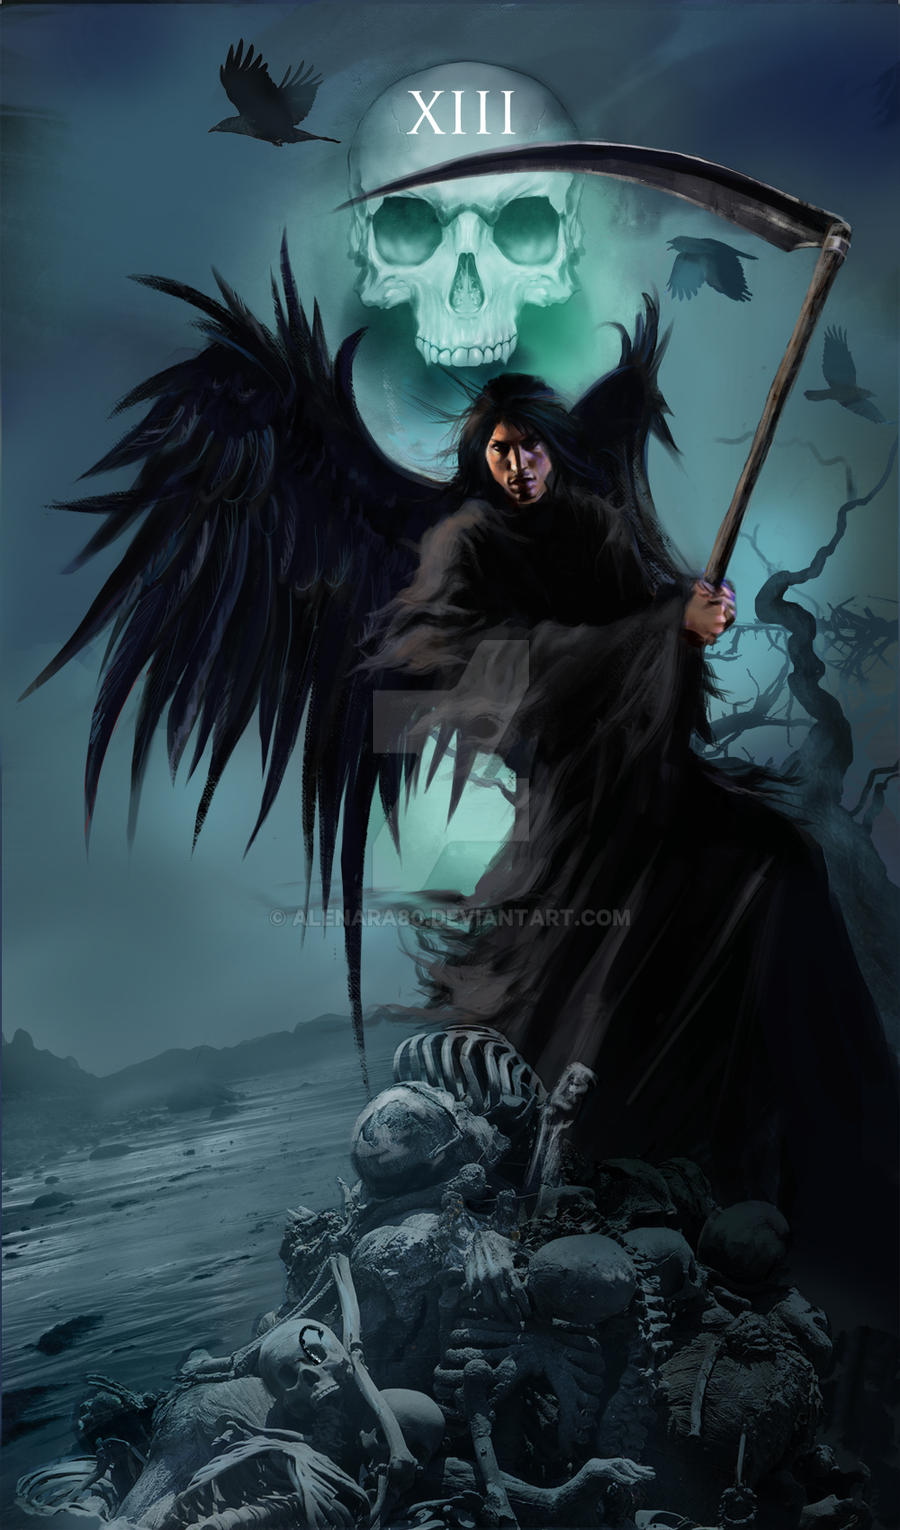 The Angel of Death by Skylord on DeviantArt